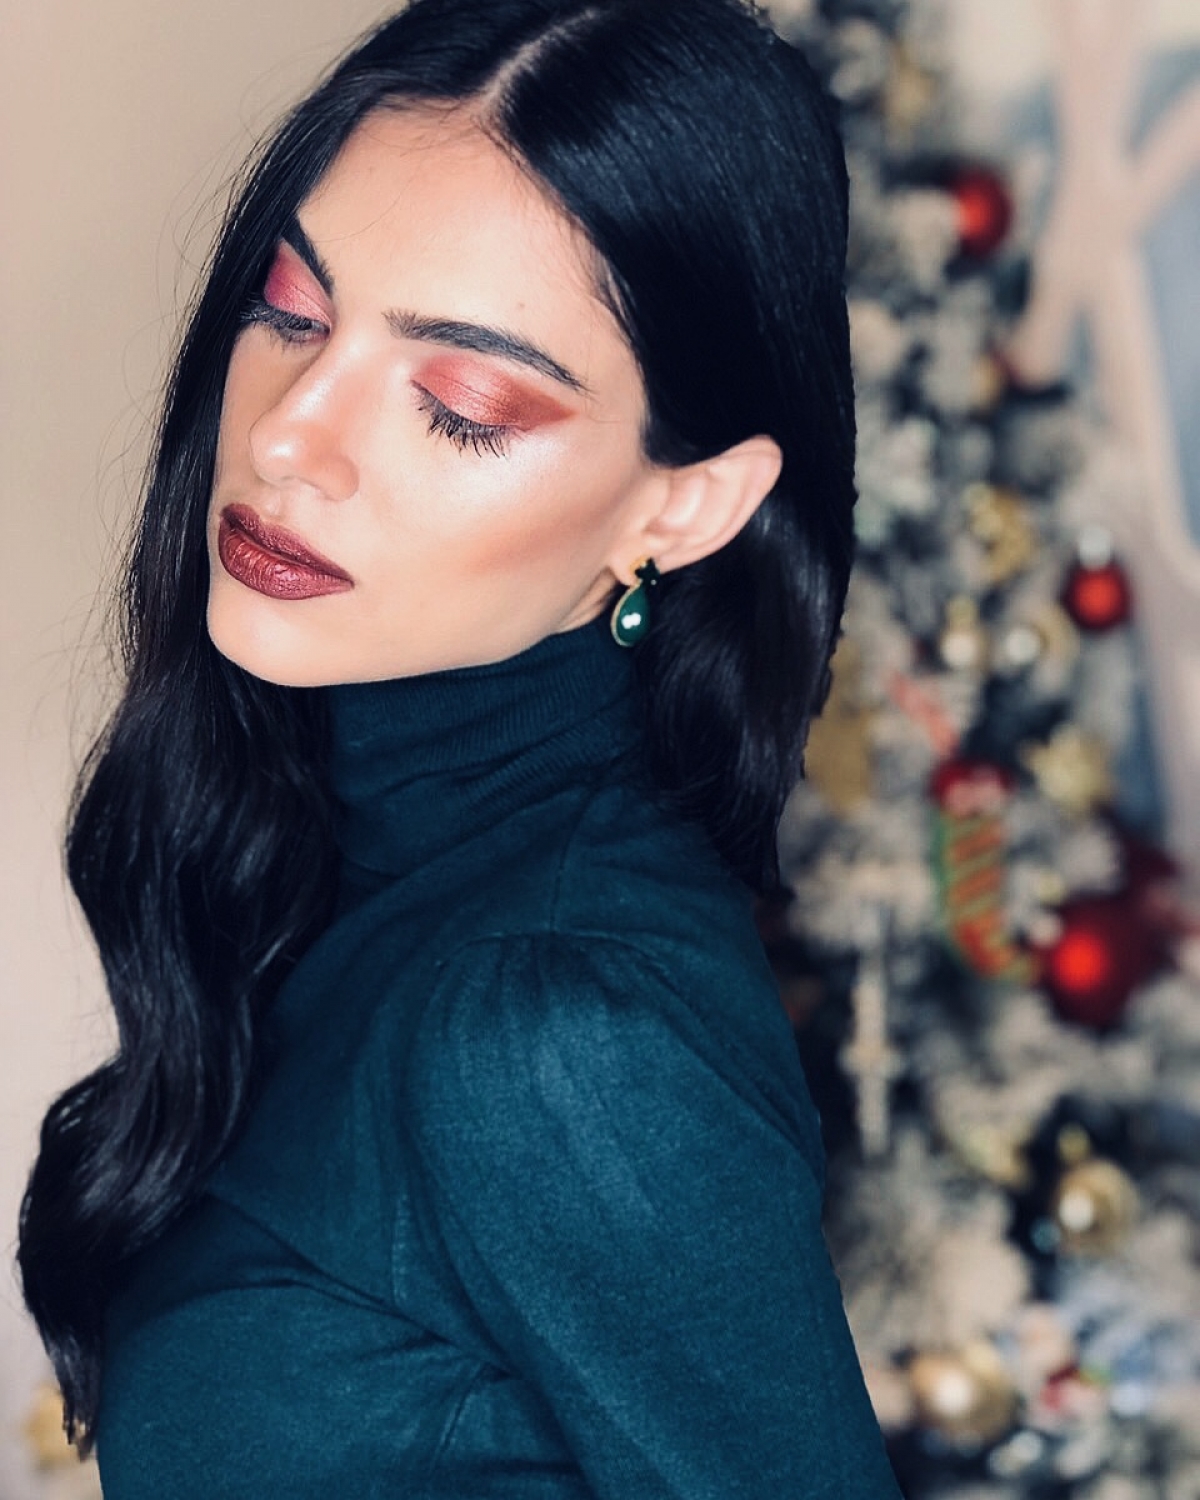 Two Festive looks for Christmas! #makeup